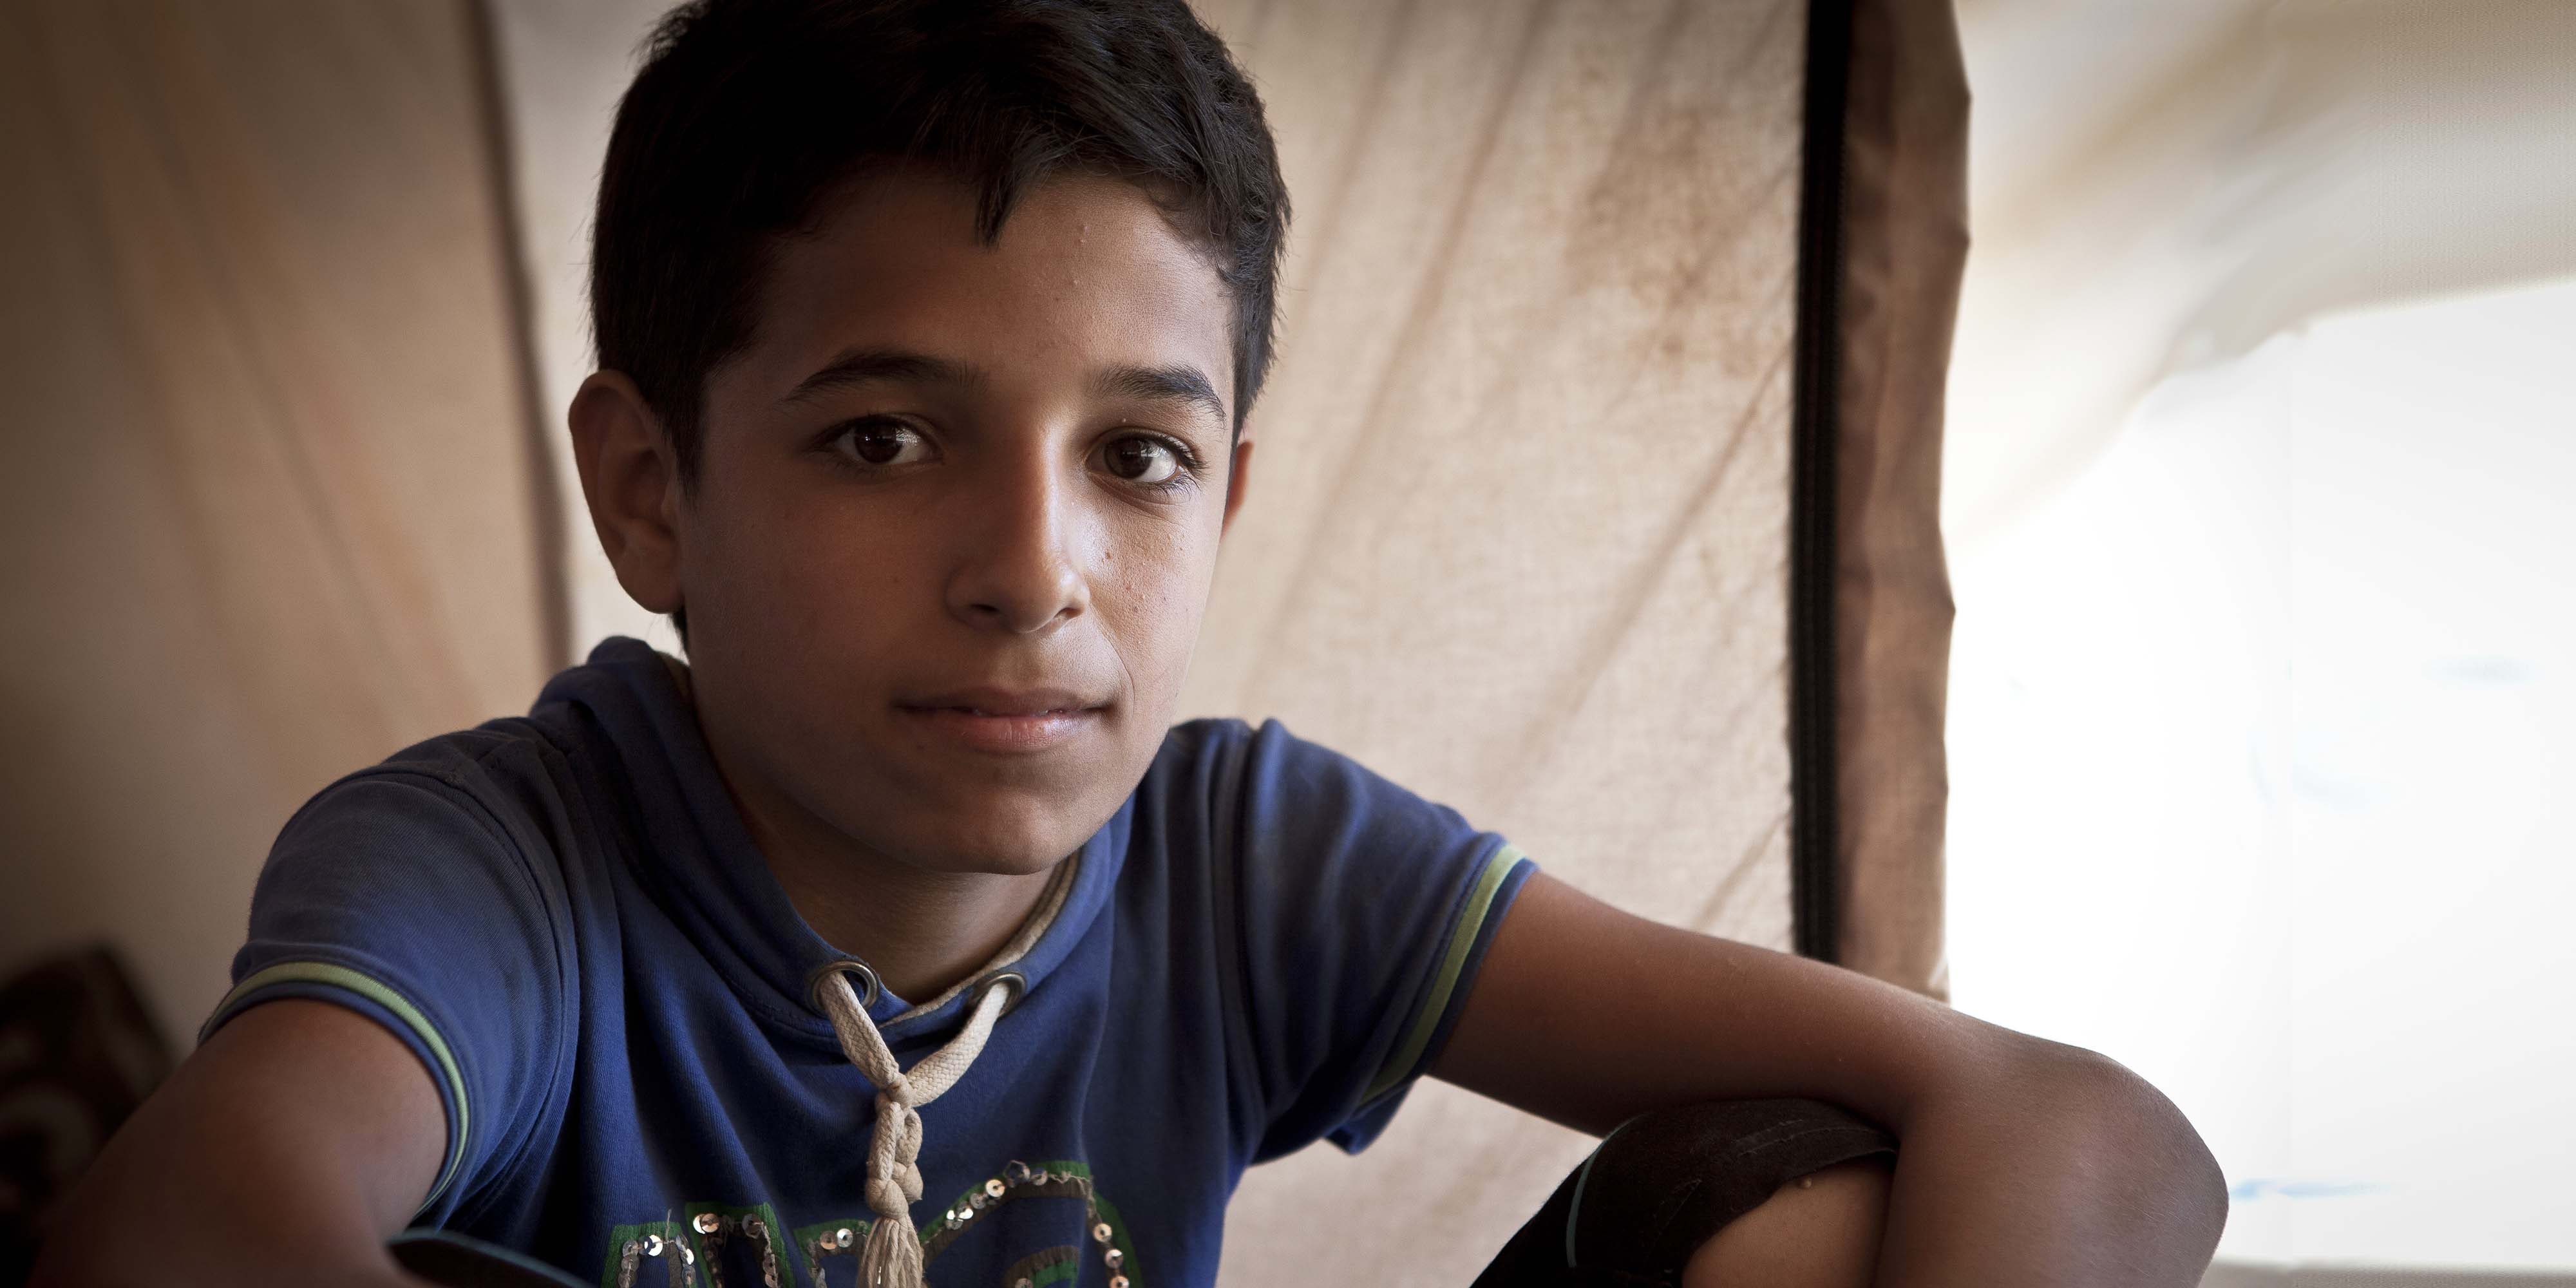 Syria, a young boy in a blue shirt looks into the camera